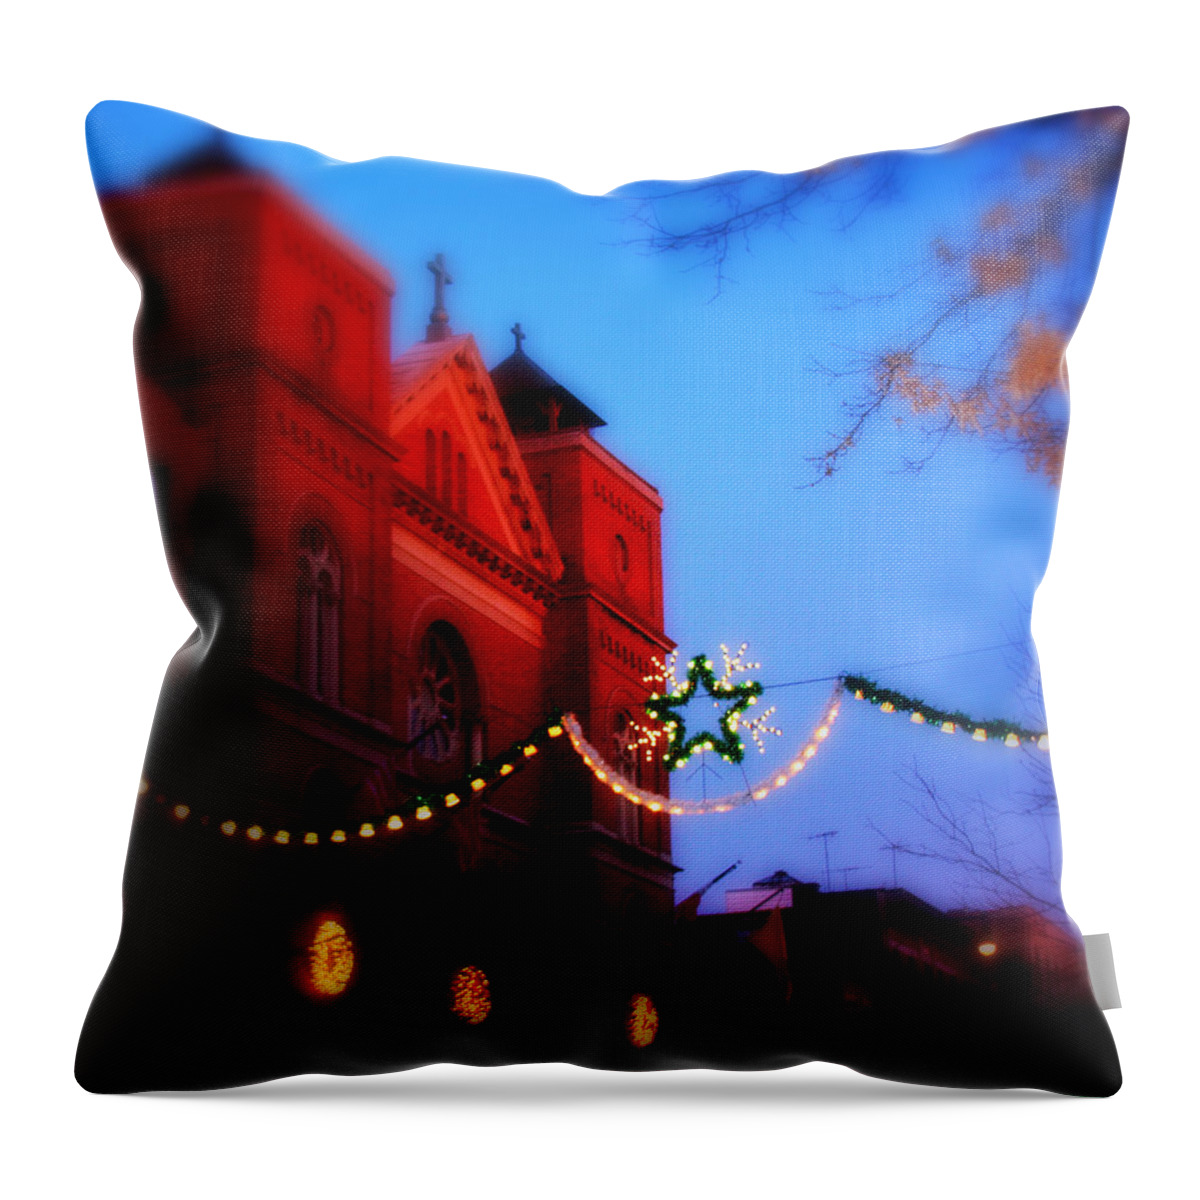 Our Lady Of Mount Carmel Throw Pillow featuring the photograph Christmas at Our Lady of Mount Carmel by Aurelio Zucco